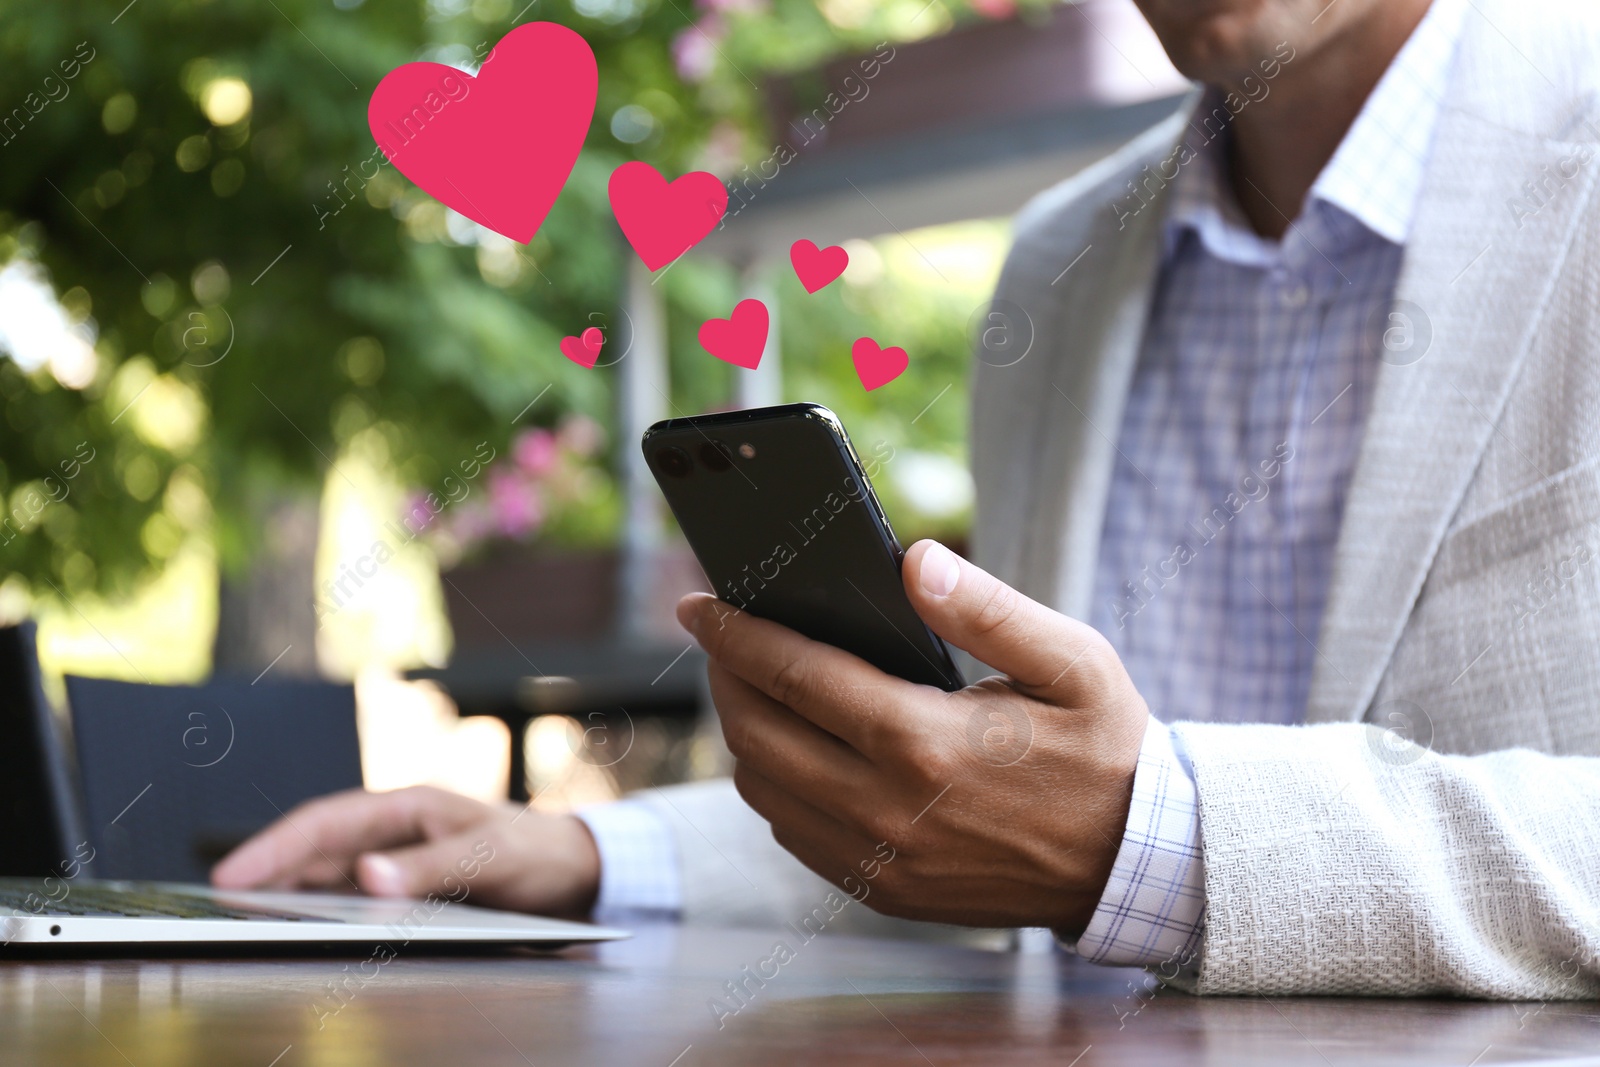 Image of Man visiting dating site via smartphone in outdoor cafe, closeup